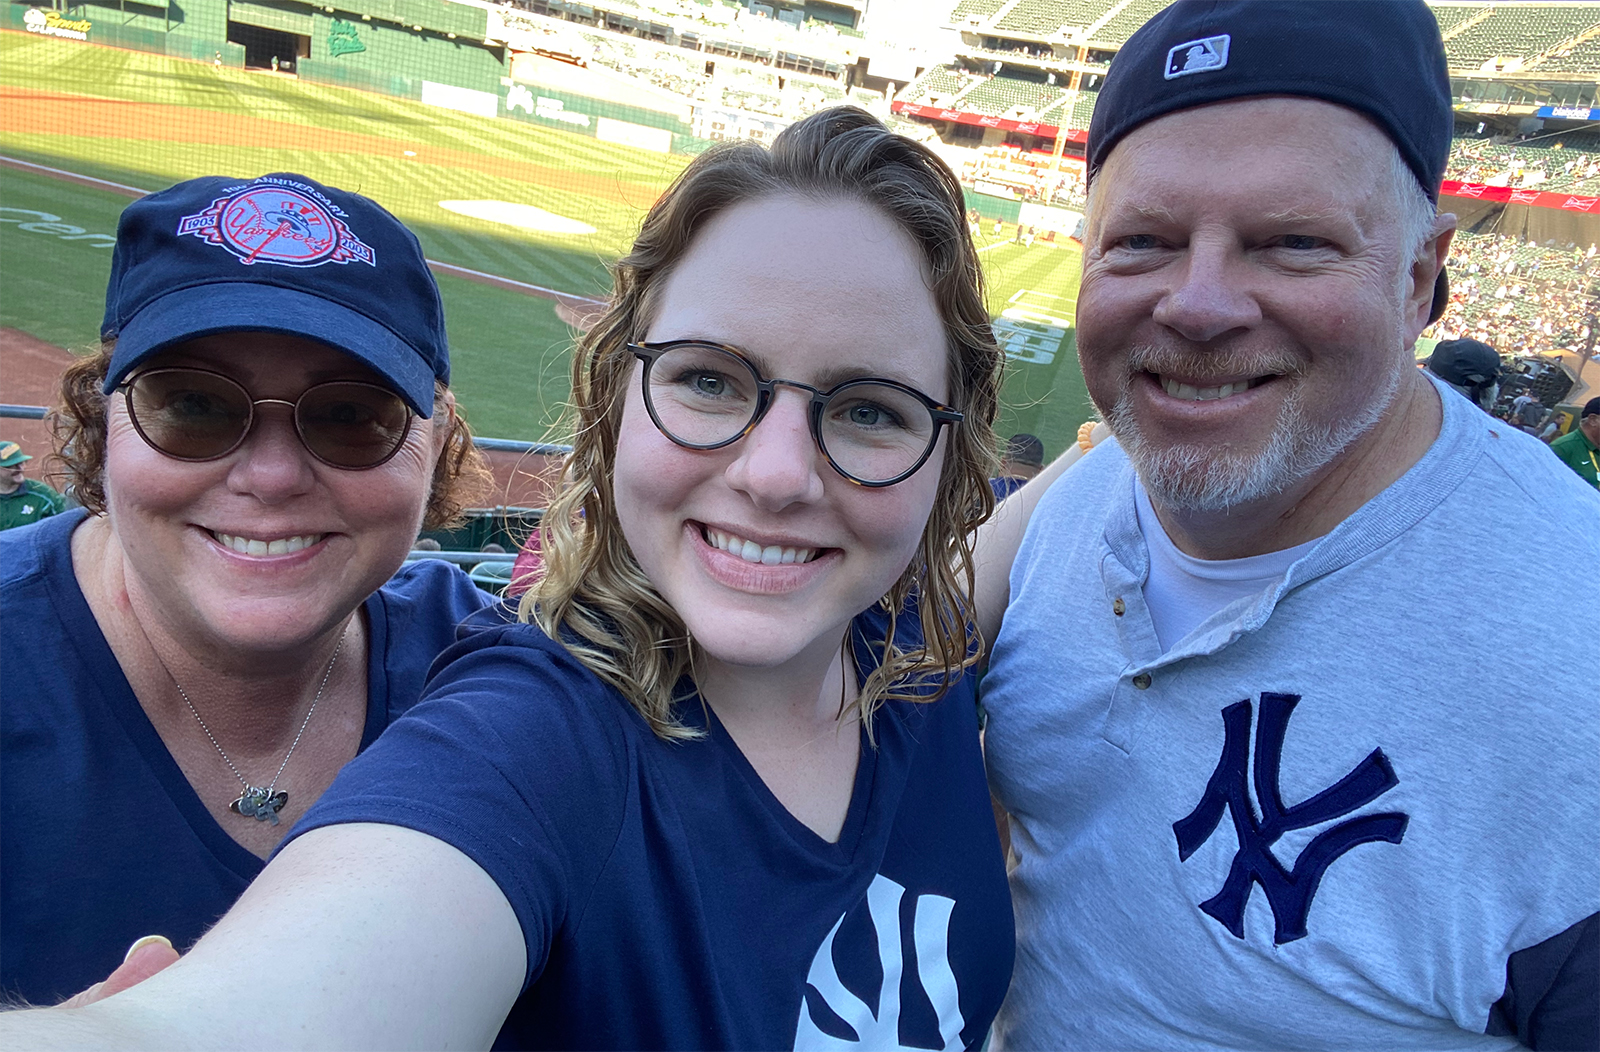 Annika Ozols with her parents at a baseball game